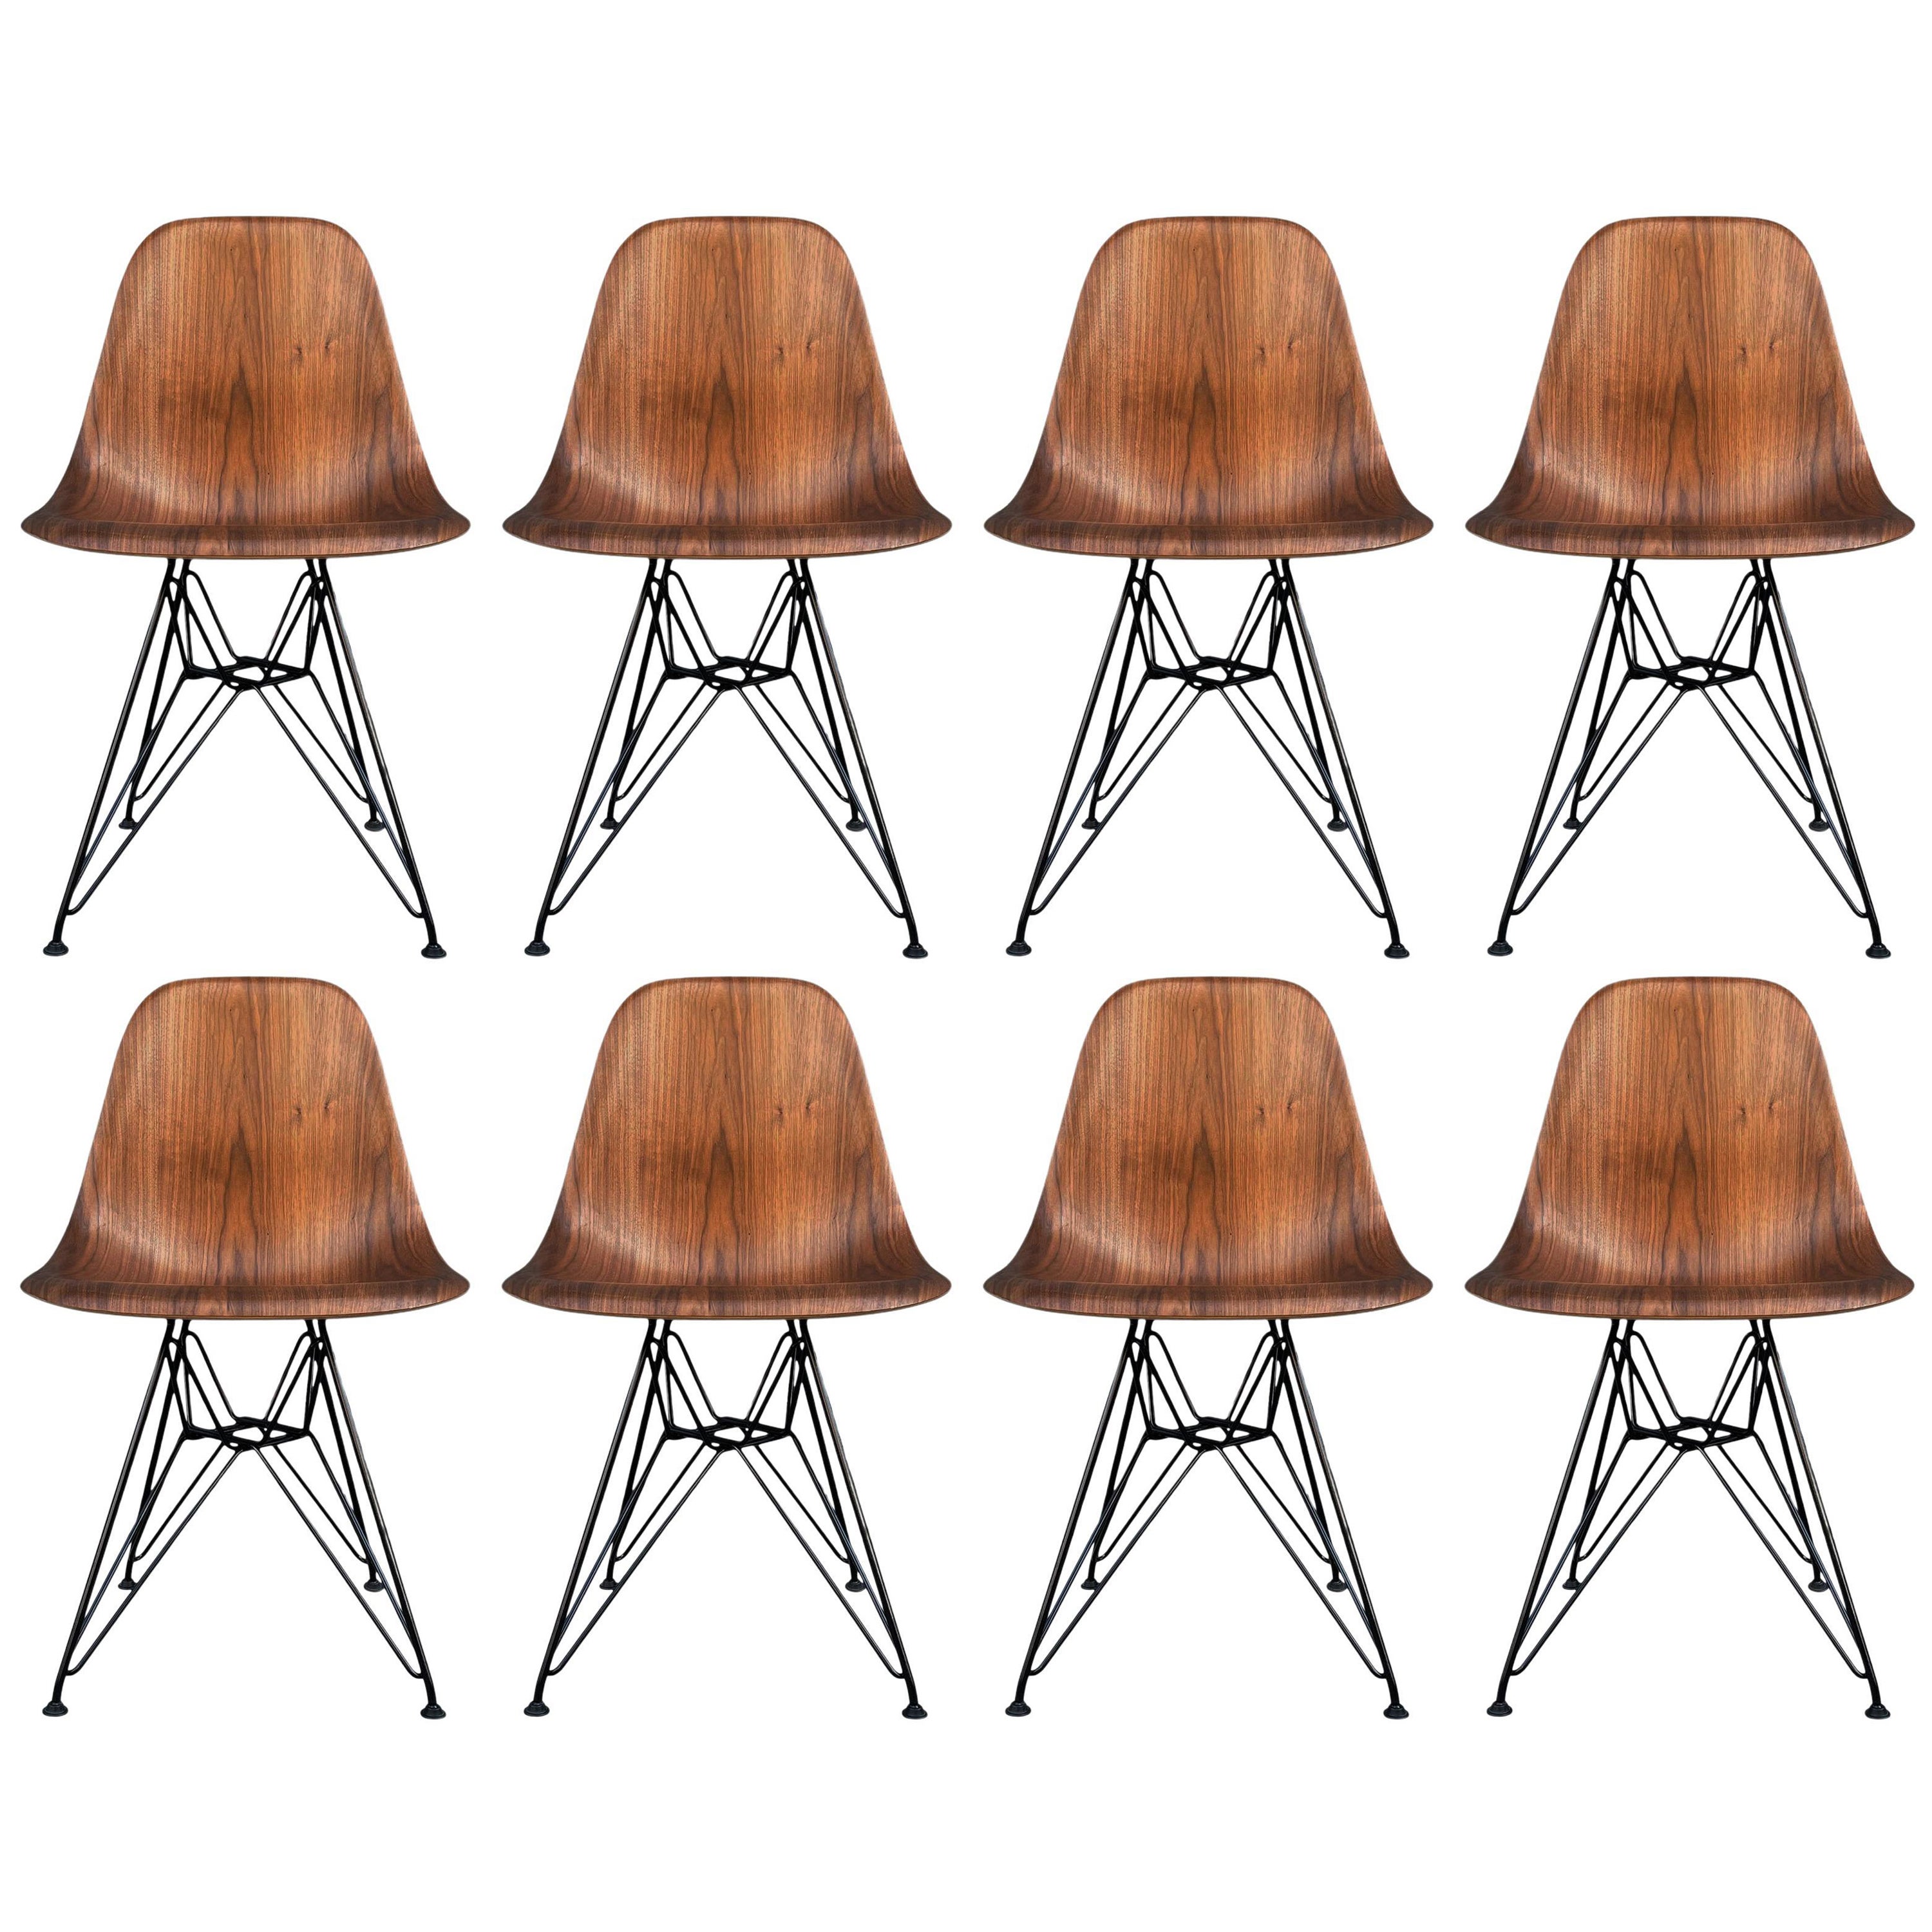 Set of 8 Mid-Century Modern Walnut Wood Shell Dining Chairs by Charles Eames For Sale